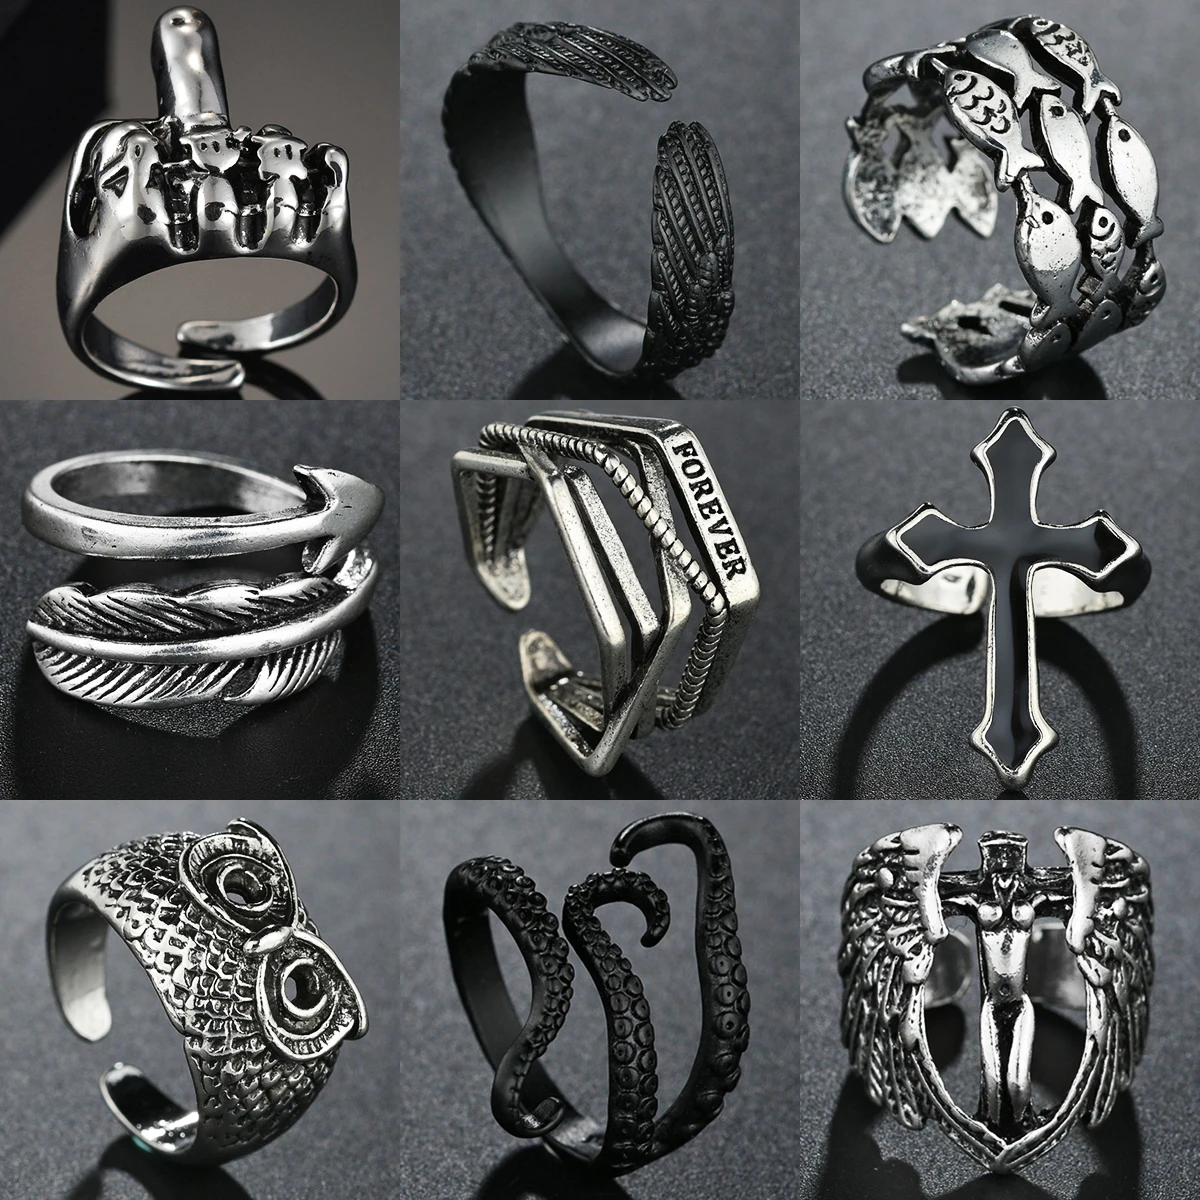 

Fashion Vintage Silvery Punk Dragon Rings For Men Women Biker Rock Opening Ring Gothic Cool Jewelry Xtmas Gift High Quality